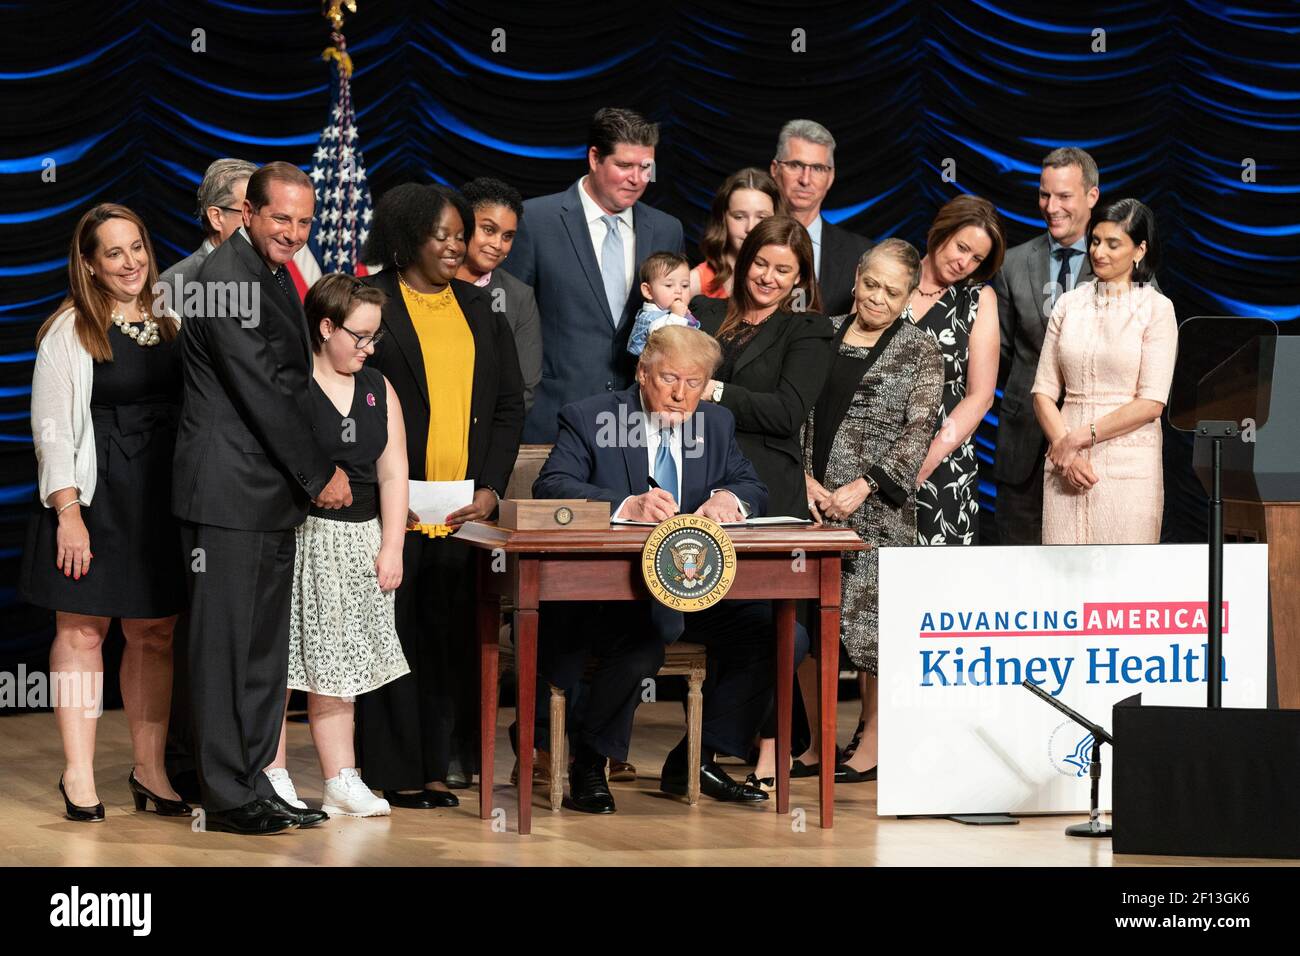 President Donald Trump signs an Executive Order on Advancing American Kidney Health Wednesday July 10 2019 at the Ronald Reagan Building and International Trade Center in Washington D.C. Stock Photo